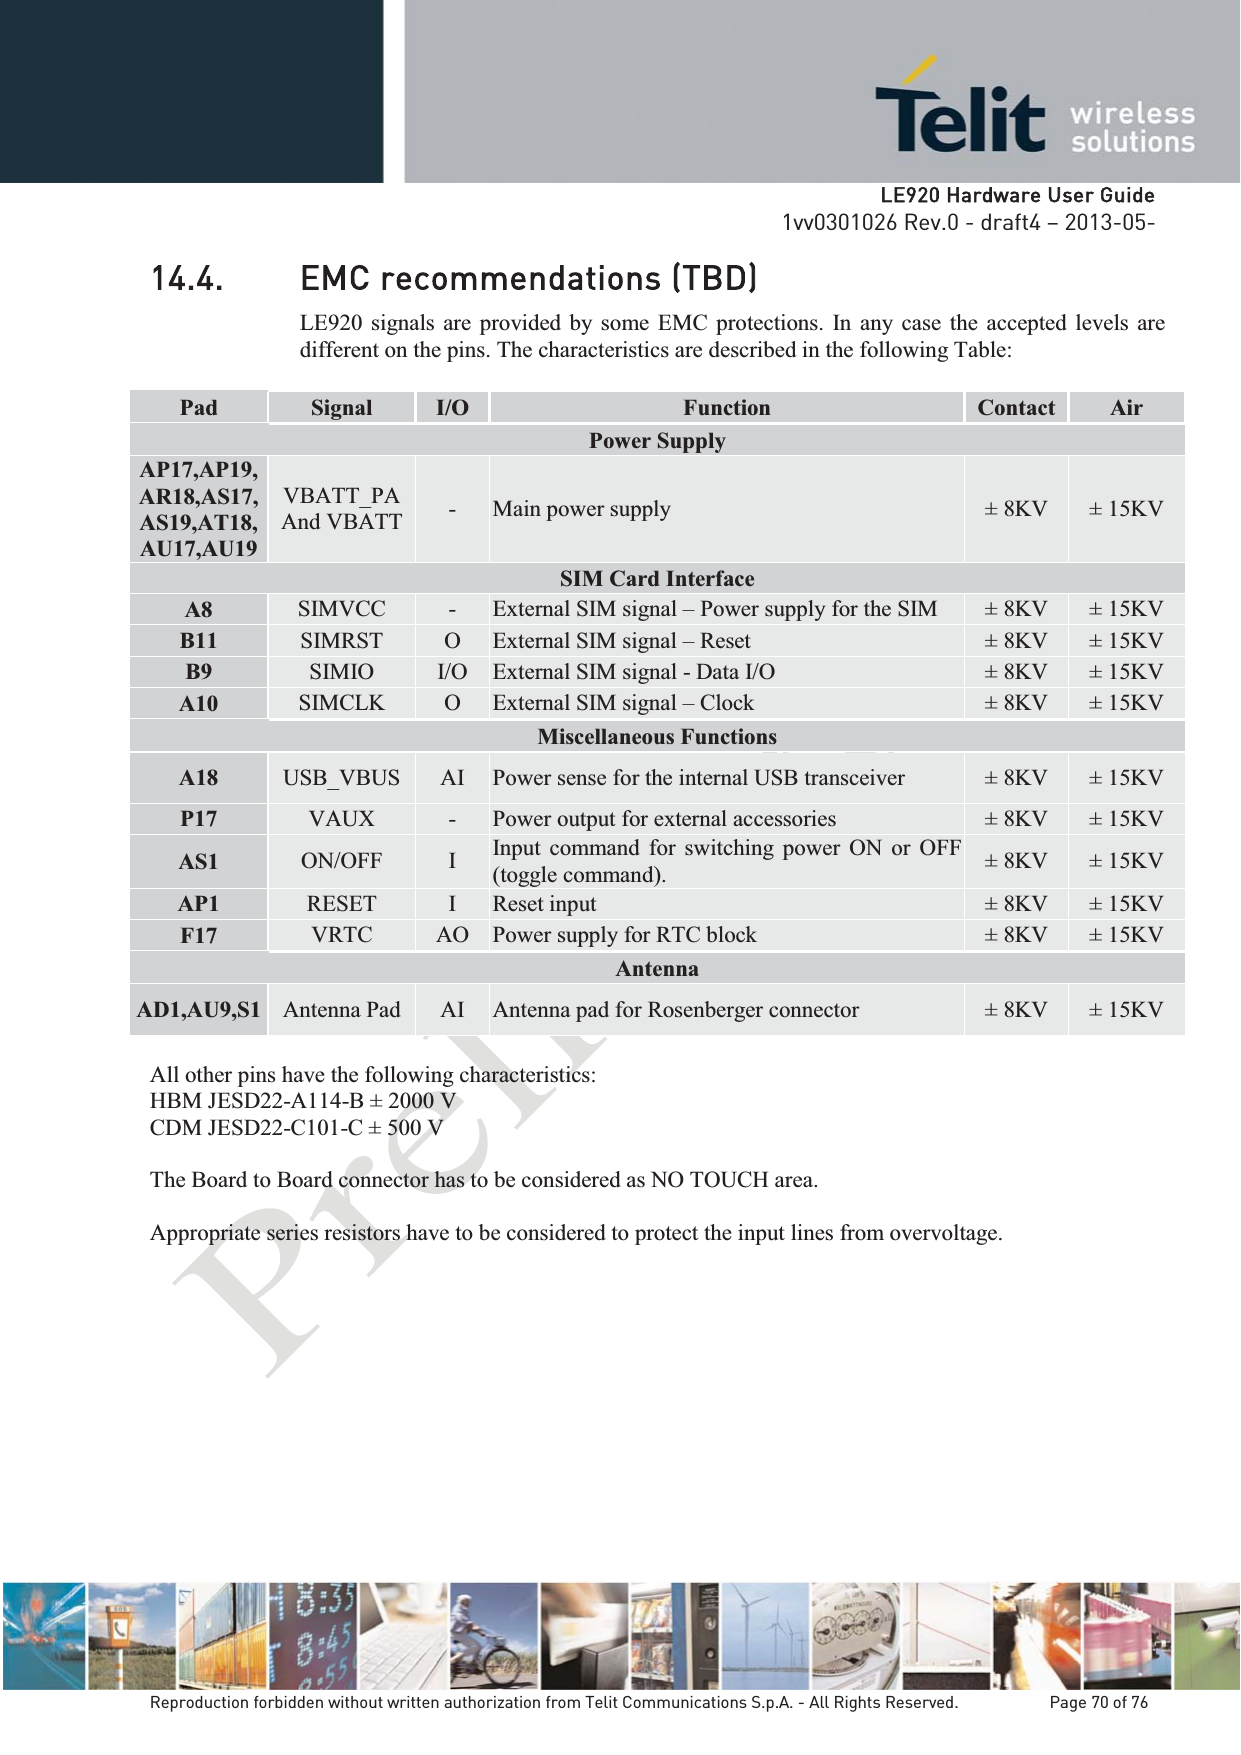   LLE920 Hardware User Guide1vv0301026 Rev.0 - draft4 – 2013-05-Reproduction forbidden without written authorization from Telit Communications S.p.A. - All Rights Reserved.    Page 70 of 76 14.4. EMC recommendations (TBD) LE920 signals are provided by some EMC protections. In any case the accepted levels are different on the pins. The characteristics are described in the following Table:  Pad  Signal  I/O  Function  Contact  Air Power Supply AP17,AP19,AR18,AS17,AS19,AT18,AU17,AU19 VBATT_PA And VBATT  -  Main power supply  ± 8KV  ± 15KV SIM Card Interface A8  SIMVCC  -  External SIM signal – Power supply for the SIM  ± 8KV  ± 15KV B11  SIMRST  O  External SIM signal – Reset  ± 8KV  ± 15KV B9  SIMIO  I/O  External SIM signal - Data I/O  ± 8KV  ± 15KV A10  SIMCLK  O  External SIM signal – Clock  ± 8KV  ± 15KV Miscellaneous Functions A18  USB_VBUS  AI  Power sense for the internal USB transceiver  ± 8KV  ± 15KV P17  VAUX -  Power output for external accessories  ± 8KV  ± 15KV AS1  ON/OFF  I  Input command for switching power ON or OFF (toggle command).   ± 8KV  ± 15KV AP1  RESET  I  Reset input  ± 8KV  ± 15KV F17  VRTC  AO  Power supply for RTC block  ± 8KV  ± 15KV Antenna AD1,AU9,S1  Antenna Pad  AI  Antenna pad for Rosenberger connector   ± 8KV  ± 15KV All other pins have the following characteristics: HBM JESD22-A114-B ± 2000 V CDM JESD22-C101-C ± 500 V  The Board to Board connector has to be considered as NO TOUCH area.  Appropriate series resistors have to be considered to protect the input lines from overvoltage. 